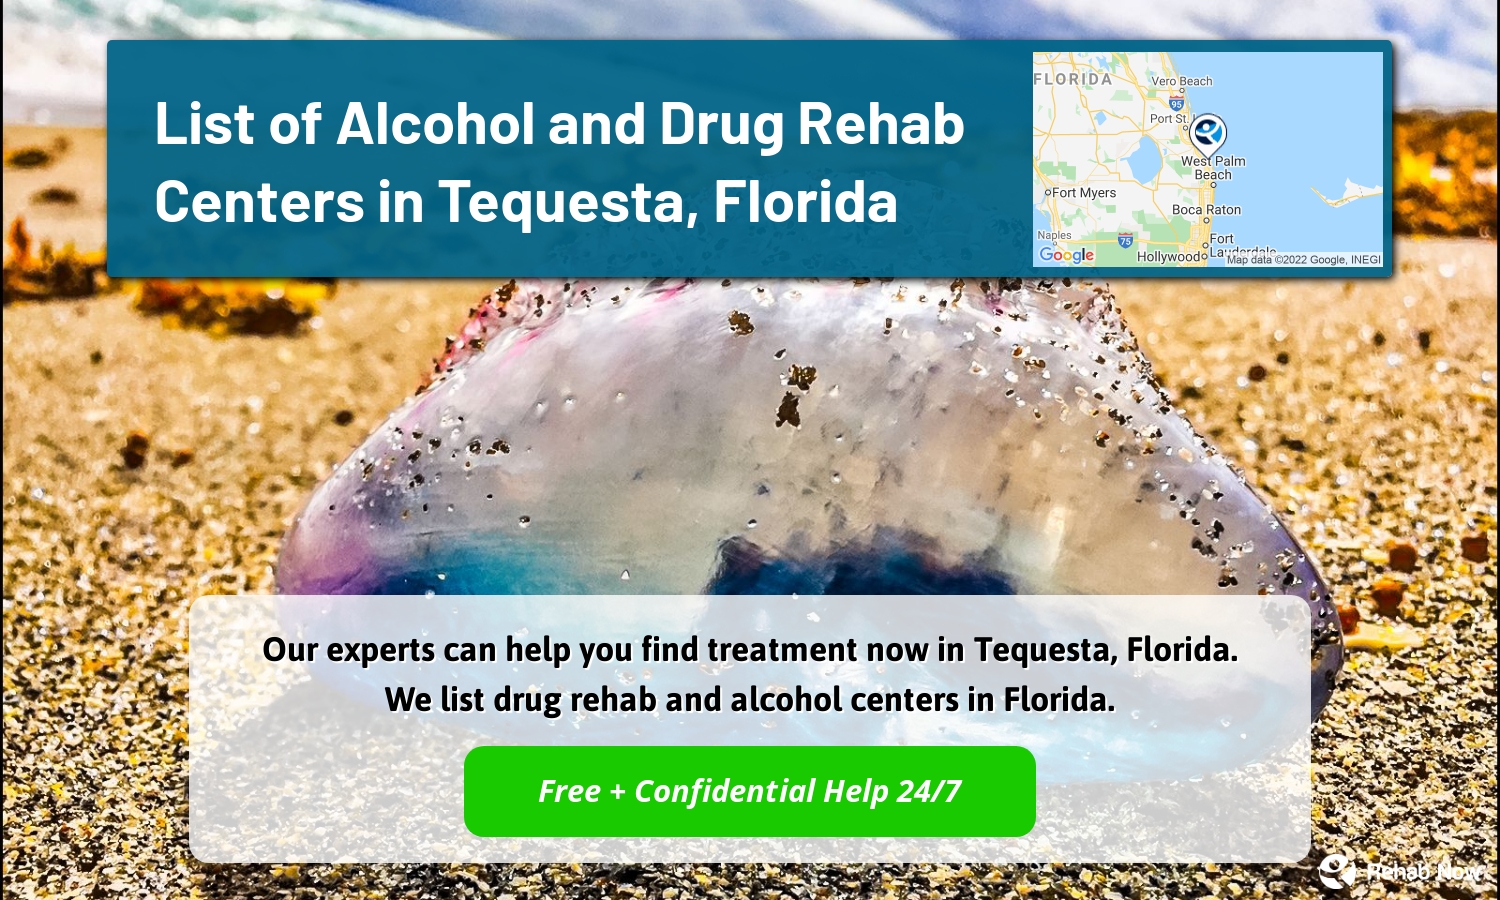 Our experts can help you find treatment now in Tequesta, Florida. We list drug rehab and alcohol centers in Florida.